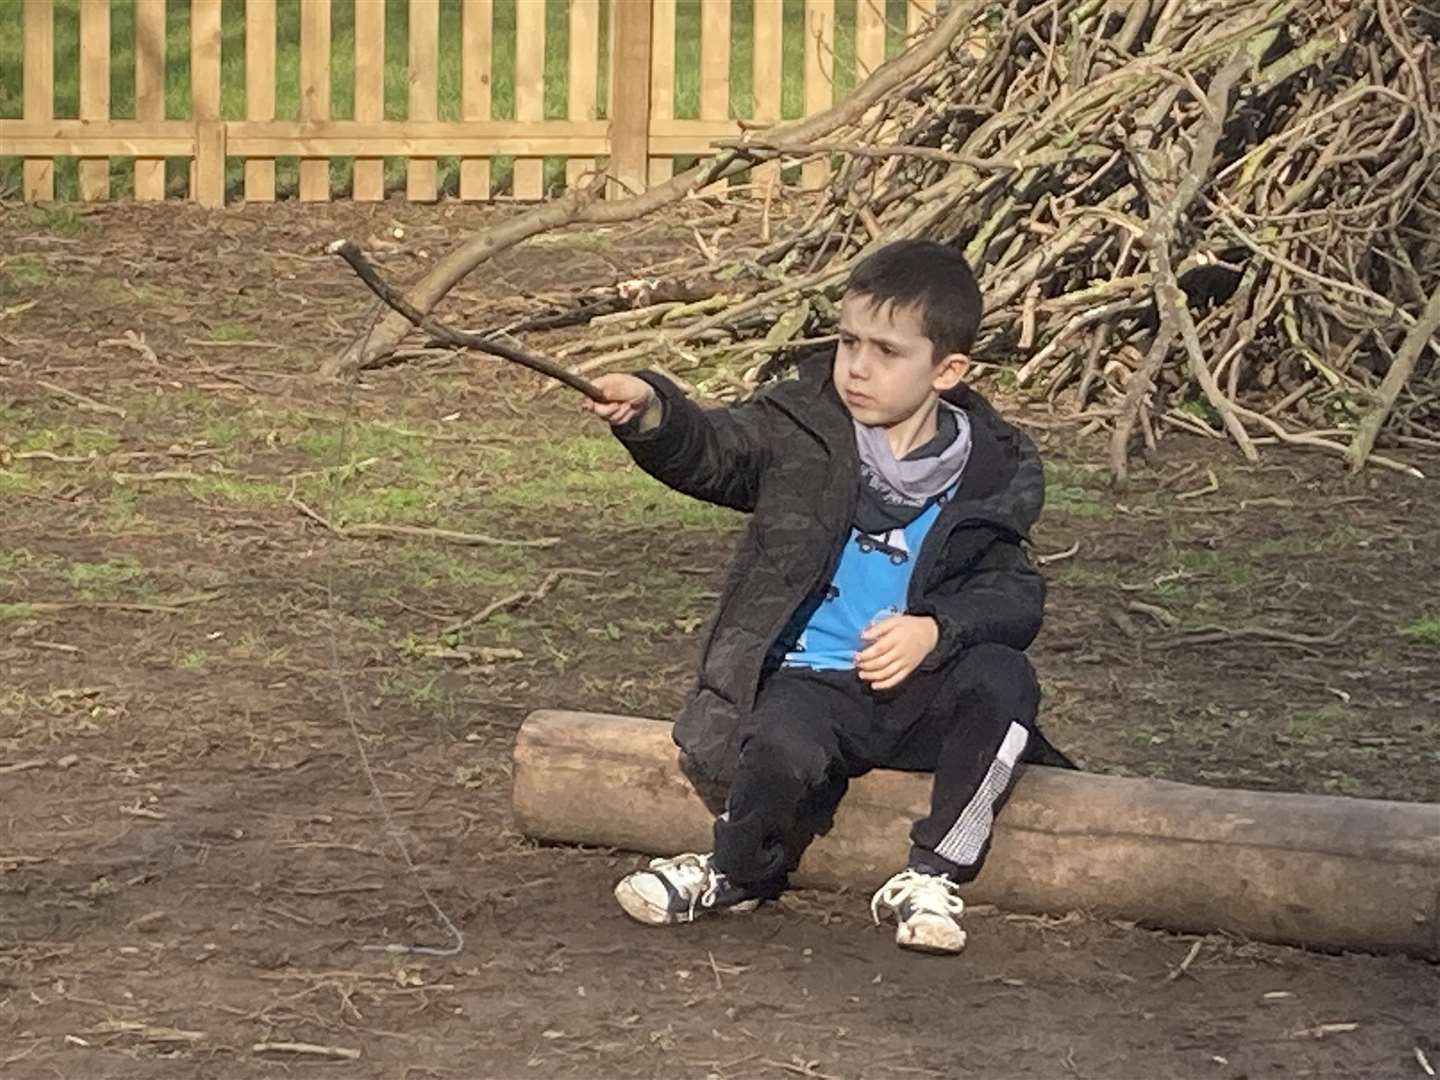 Luis, 6, and his stick during forest school at Sunny Bank Primary School